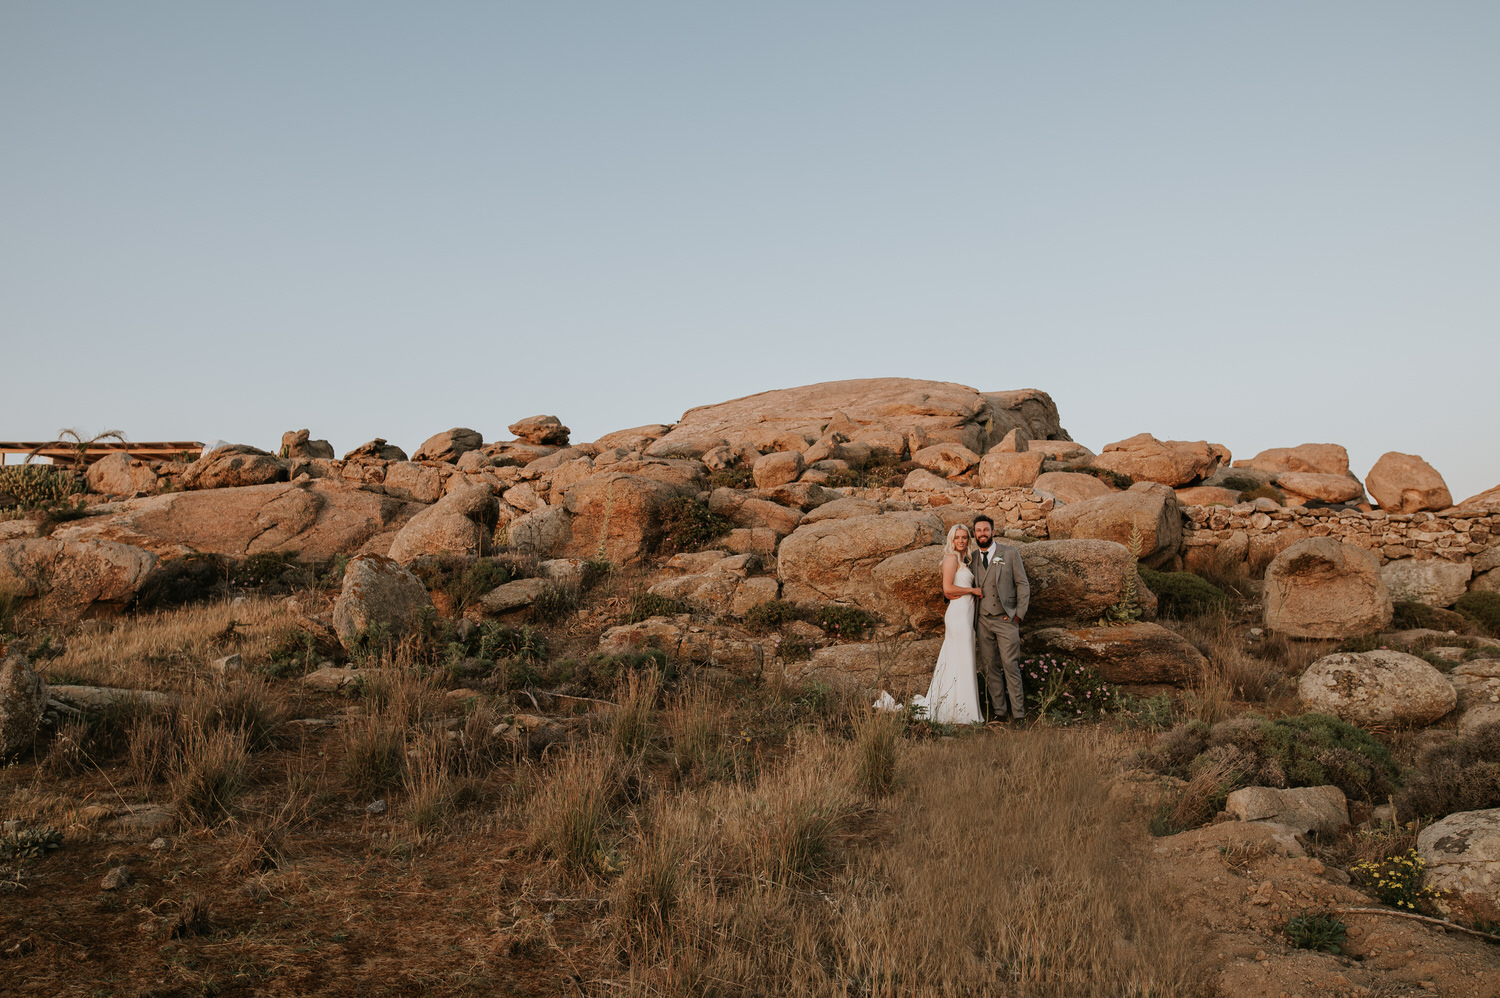 Mykonos wedding photographer: bride and groom standing in the grass field next to the giant rocks after the sunset.